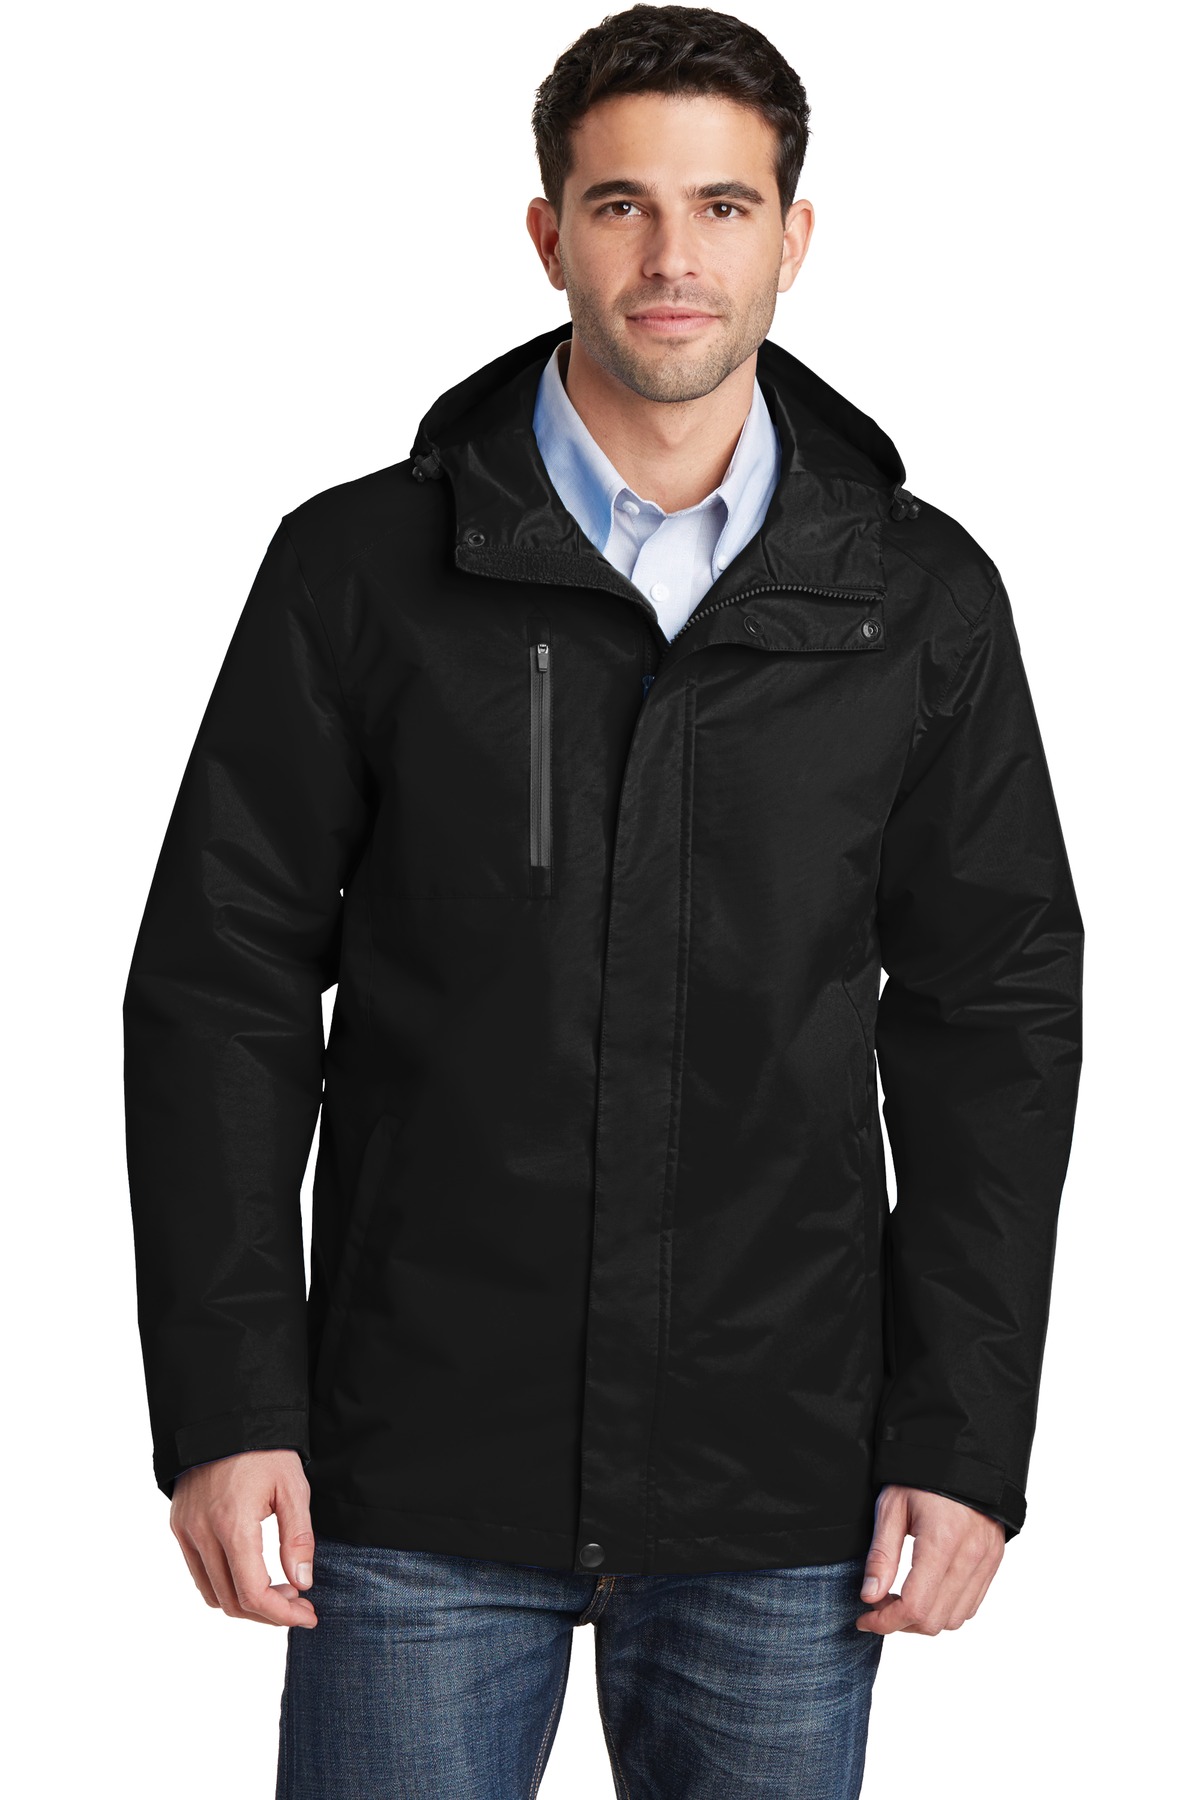 Port Authority All&#45;Conditions Jacket-Port Authority